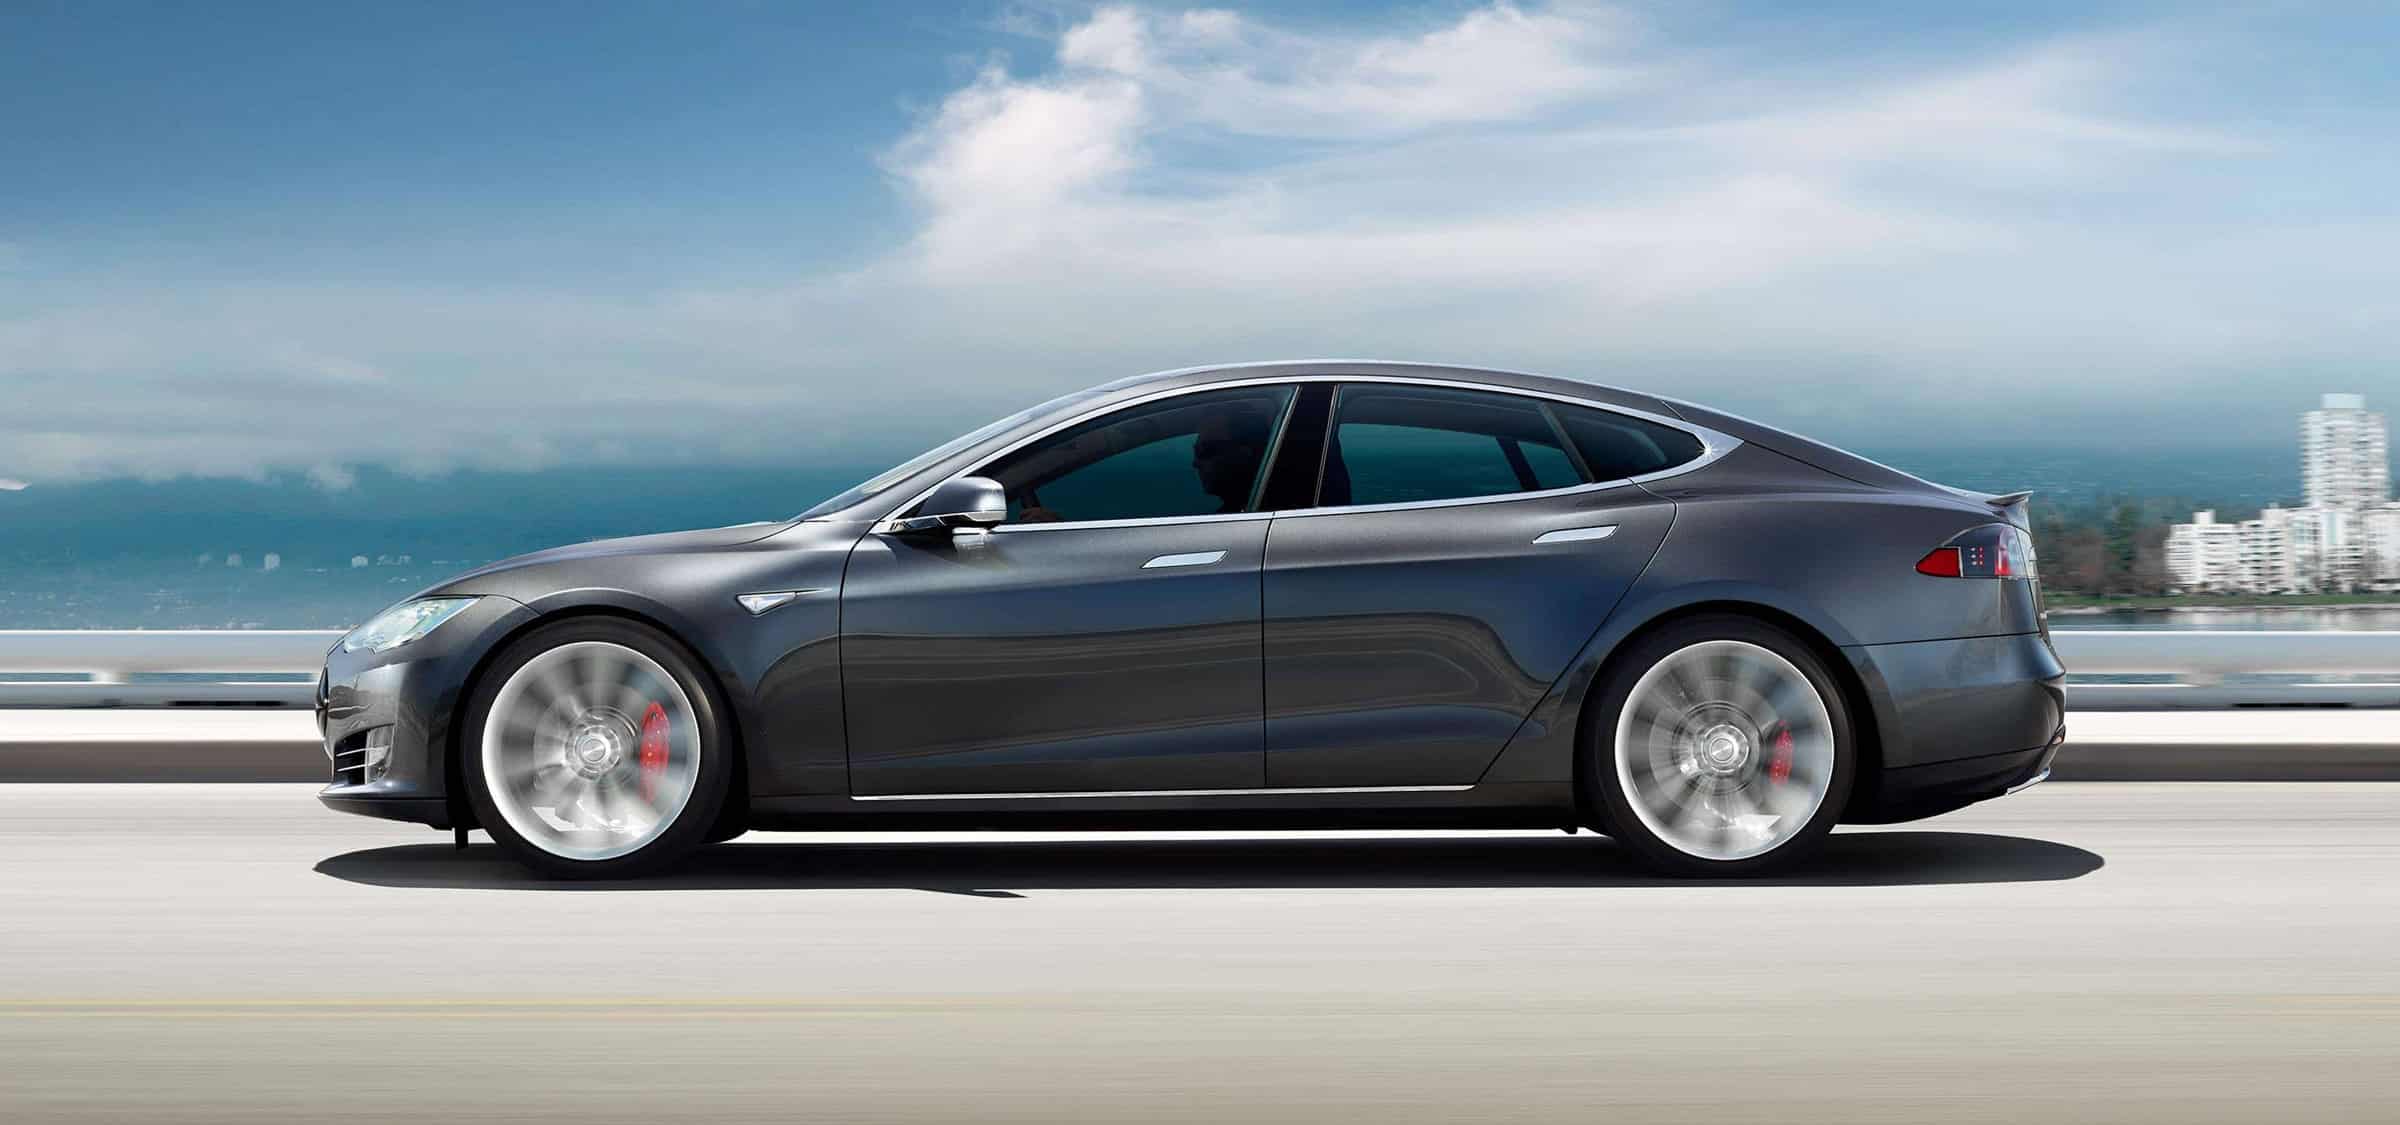 Tesla Rejects ‘Unintended Acceleration’ Claims